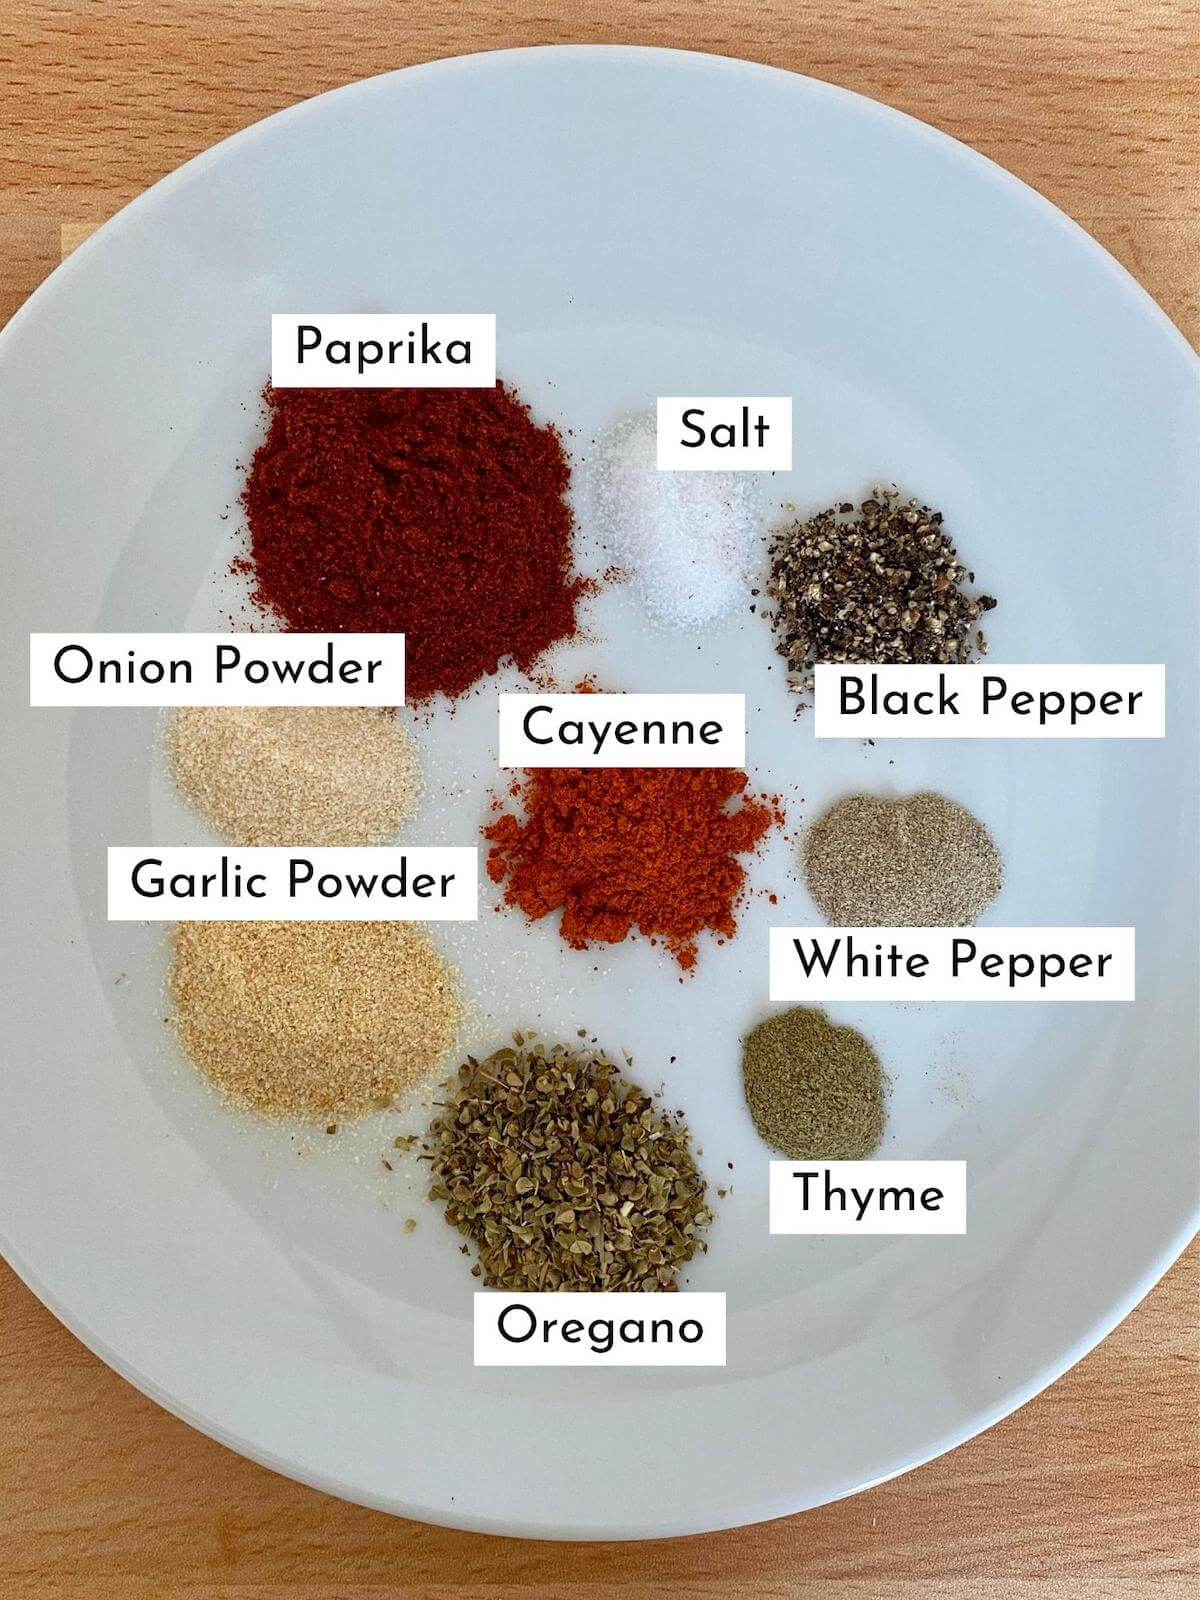 All of the ingredients to make homemade Cajun seasoning displayed on a small, white plate. Each ingredient is labeled with black text on a white background.